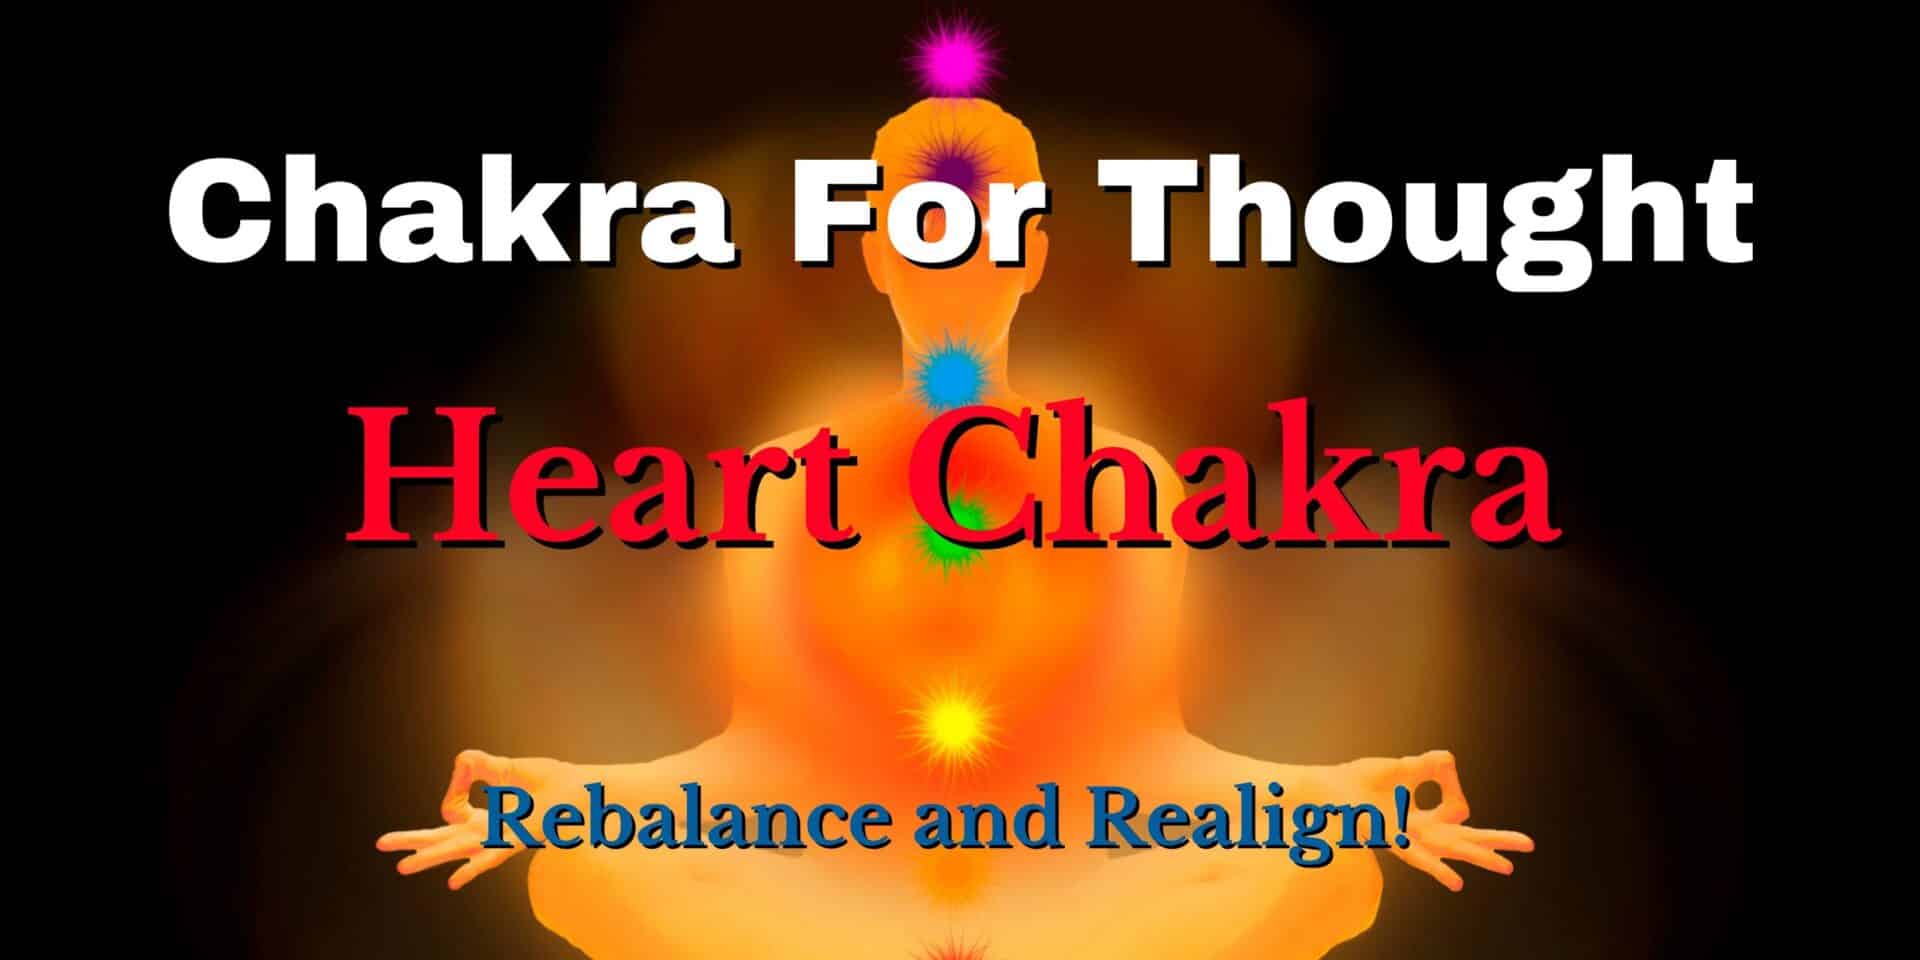 chakra for thought : heart chakra - spiritual meanings